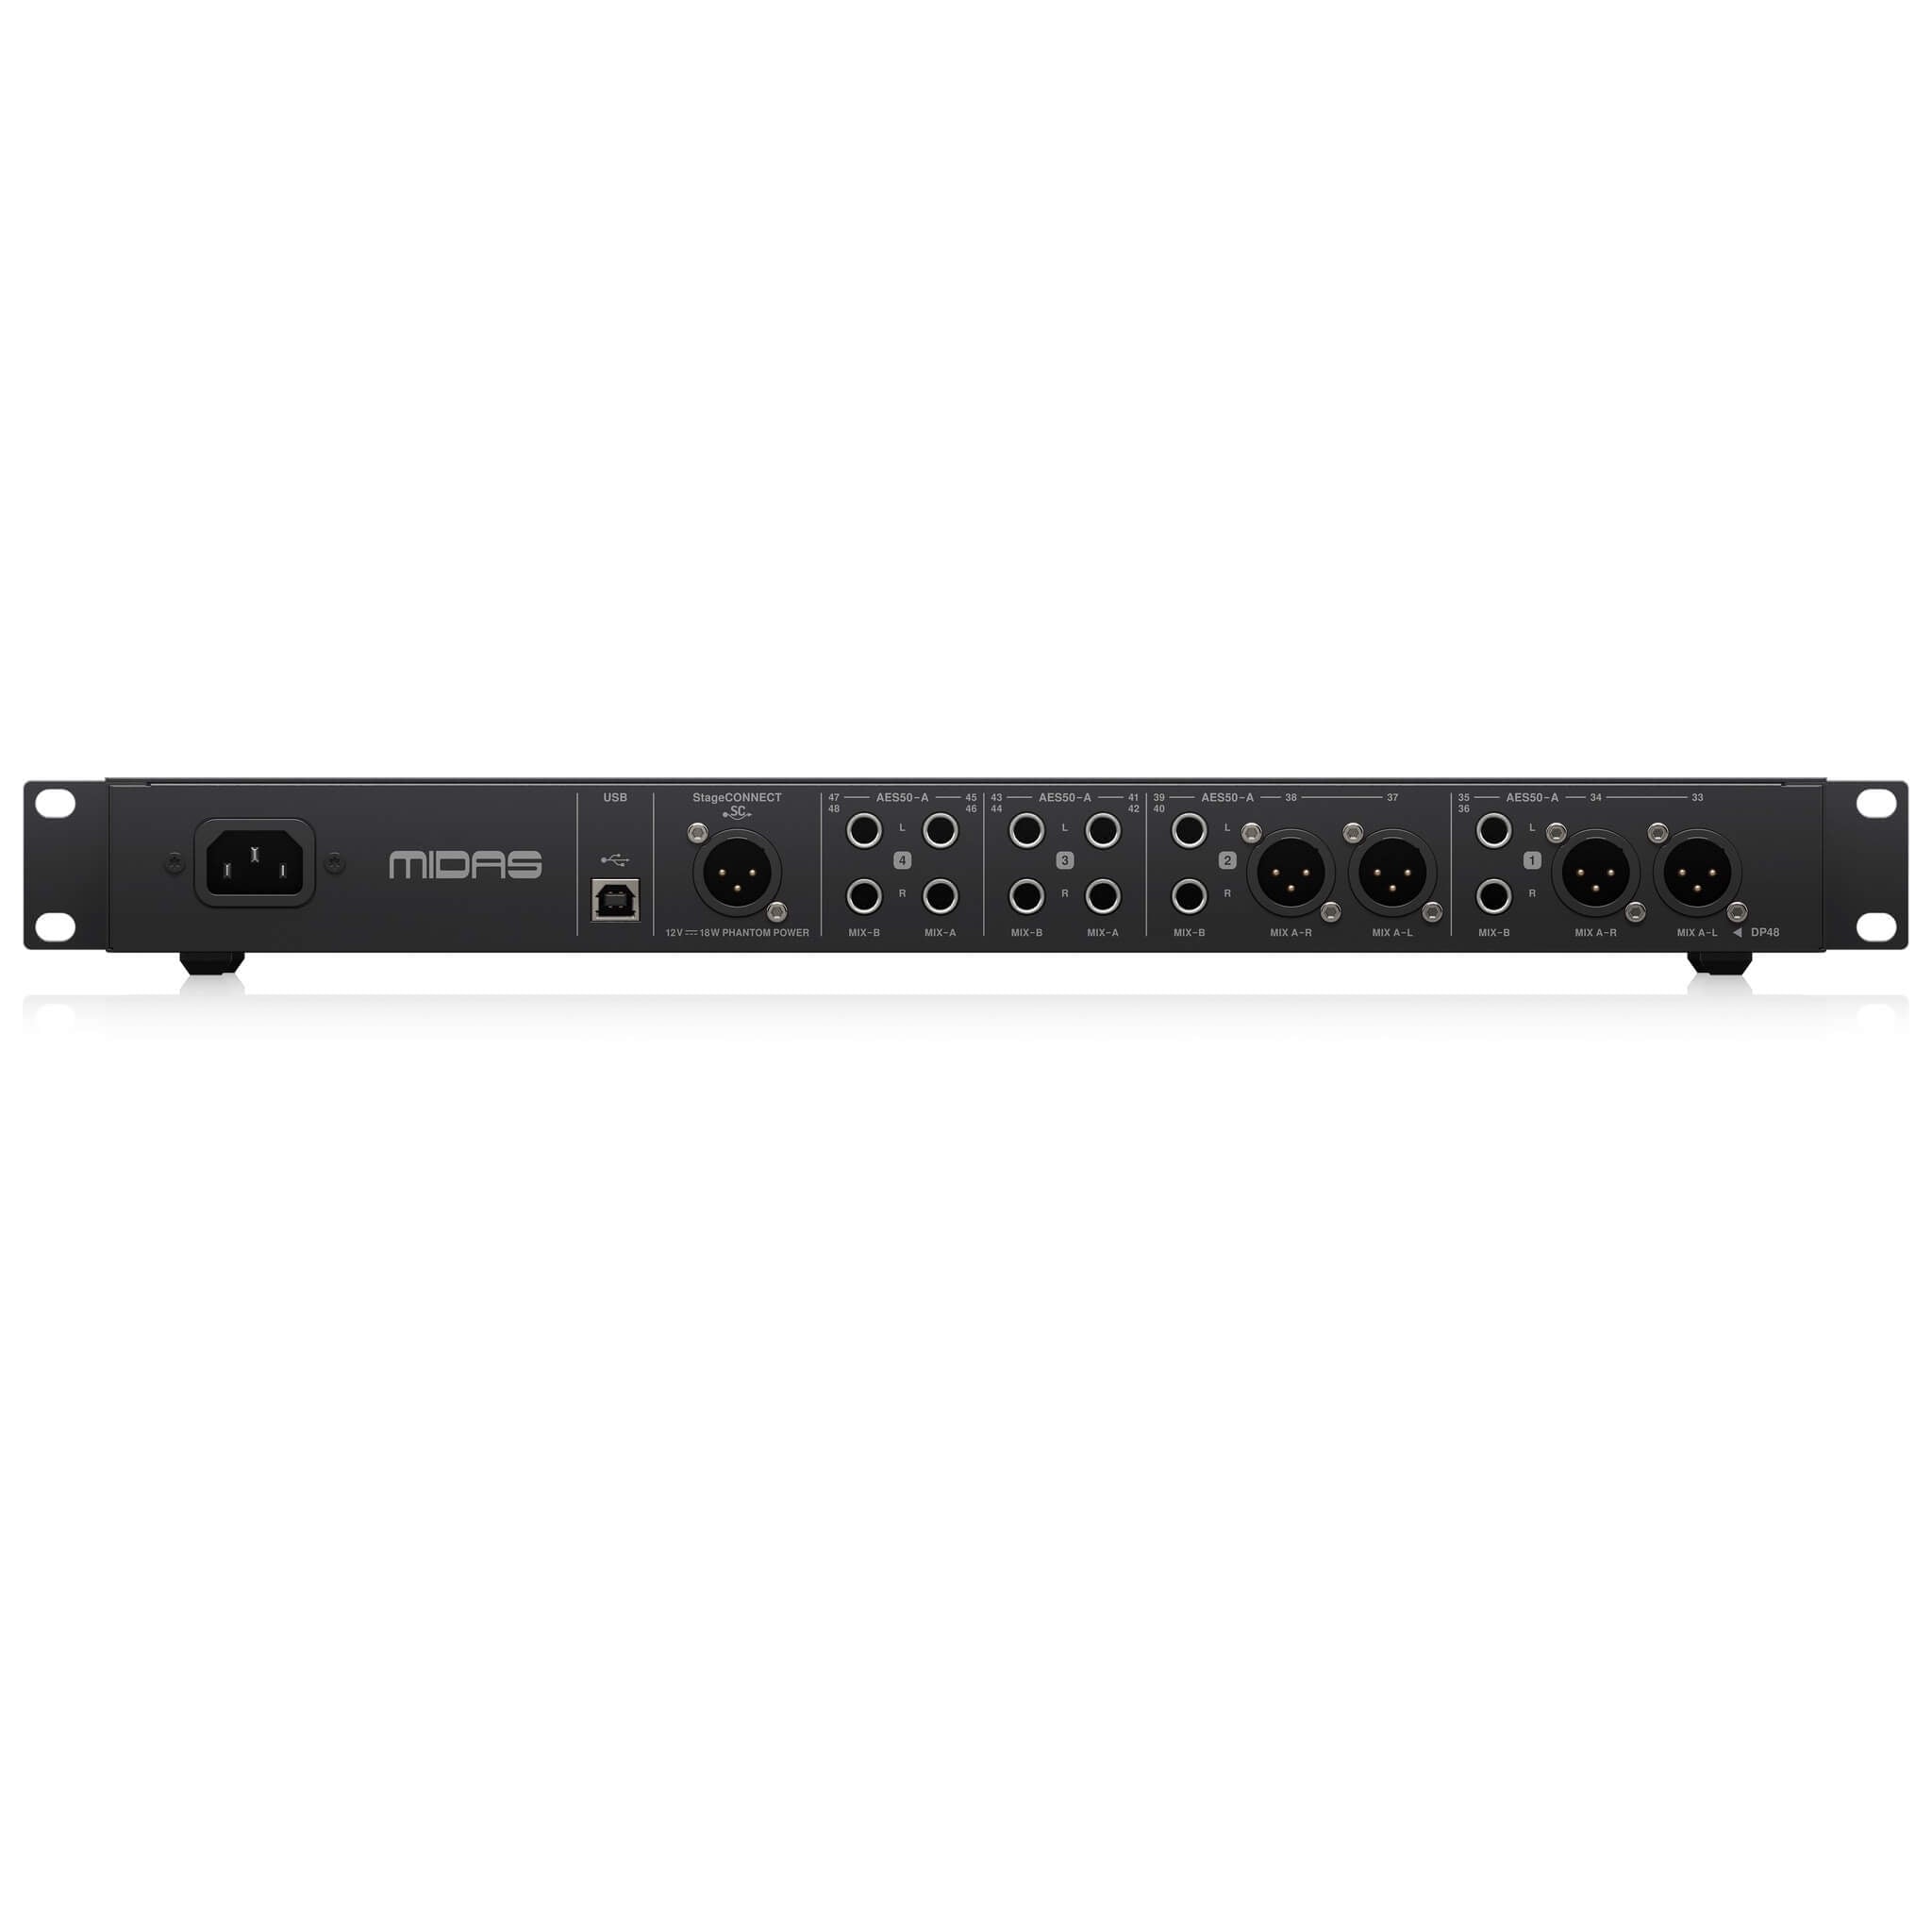 Midas HUB4 - Monitor System Hub with 4 PoE Ports for Personal Mixers, rear